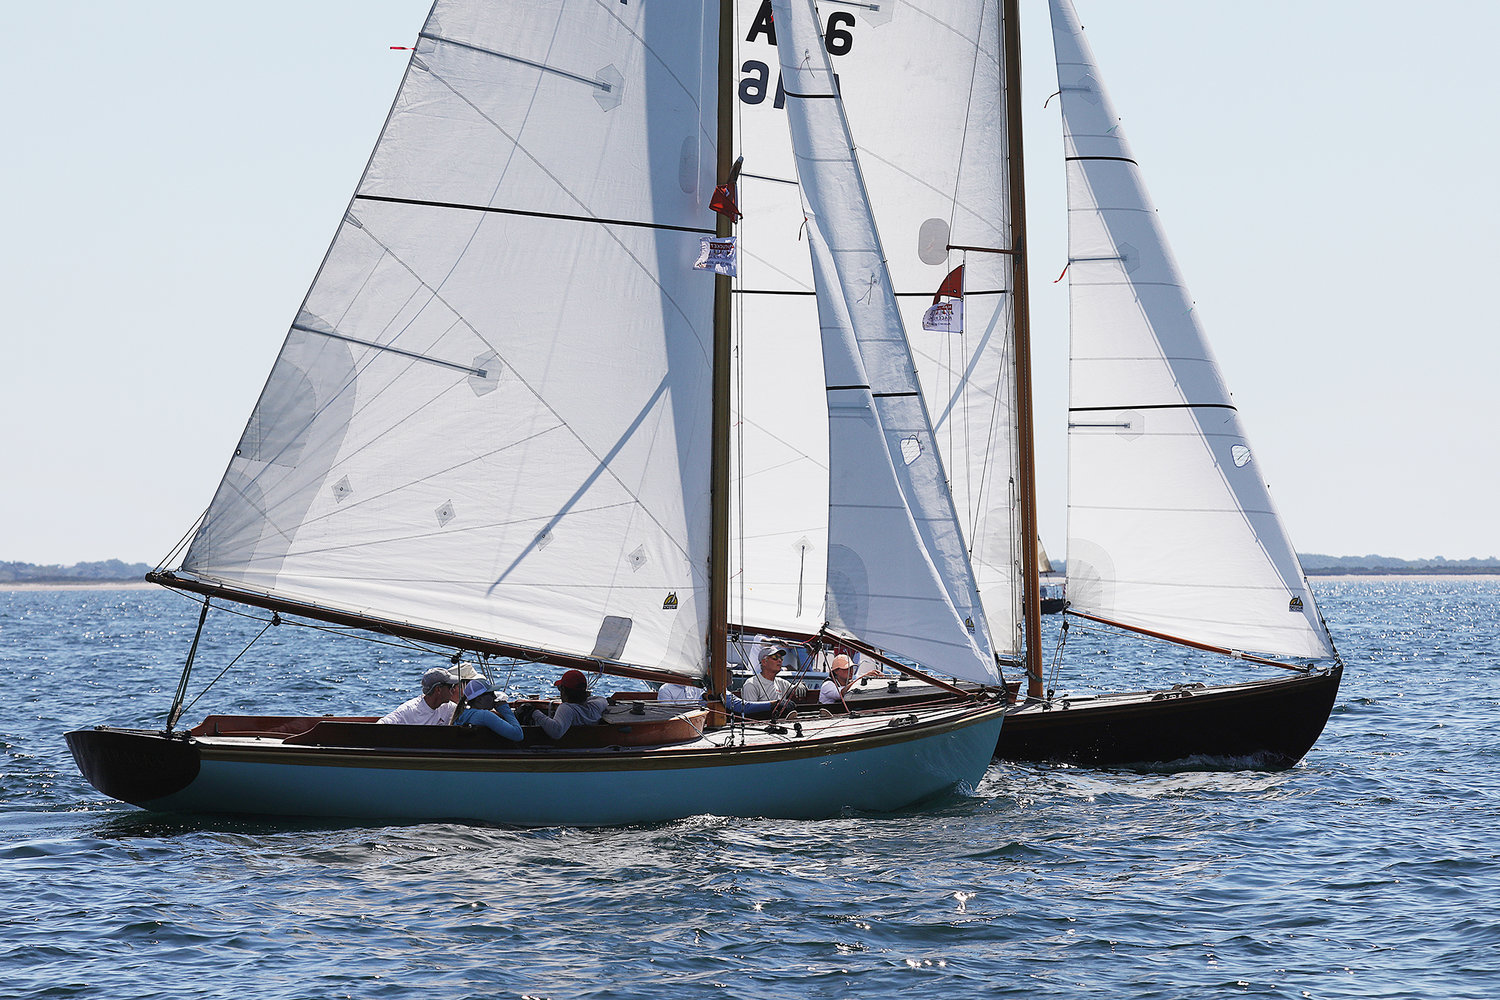 Two Alerions line up at the start of the Opera House Cup race on Sunday in Nantucket Sound.